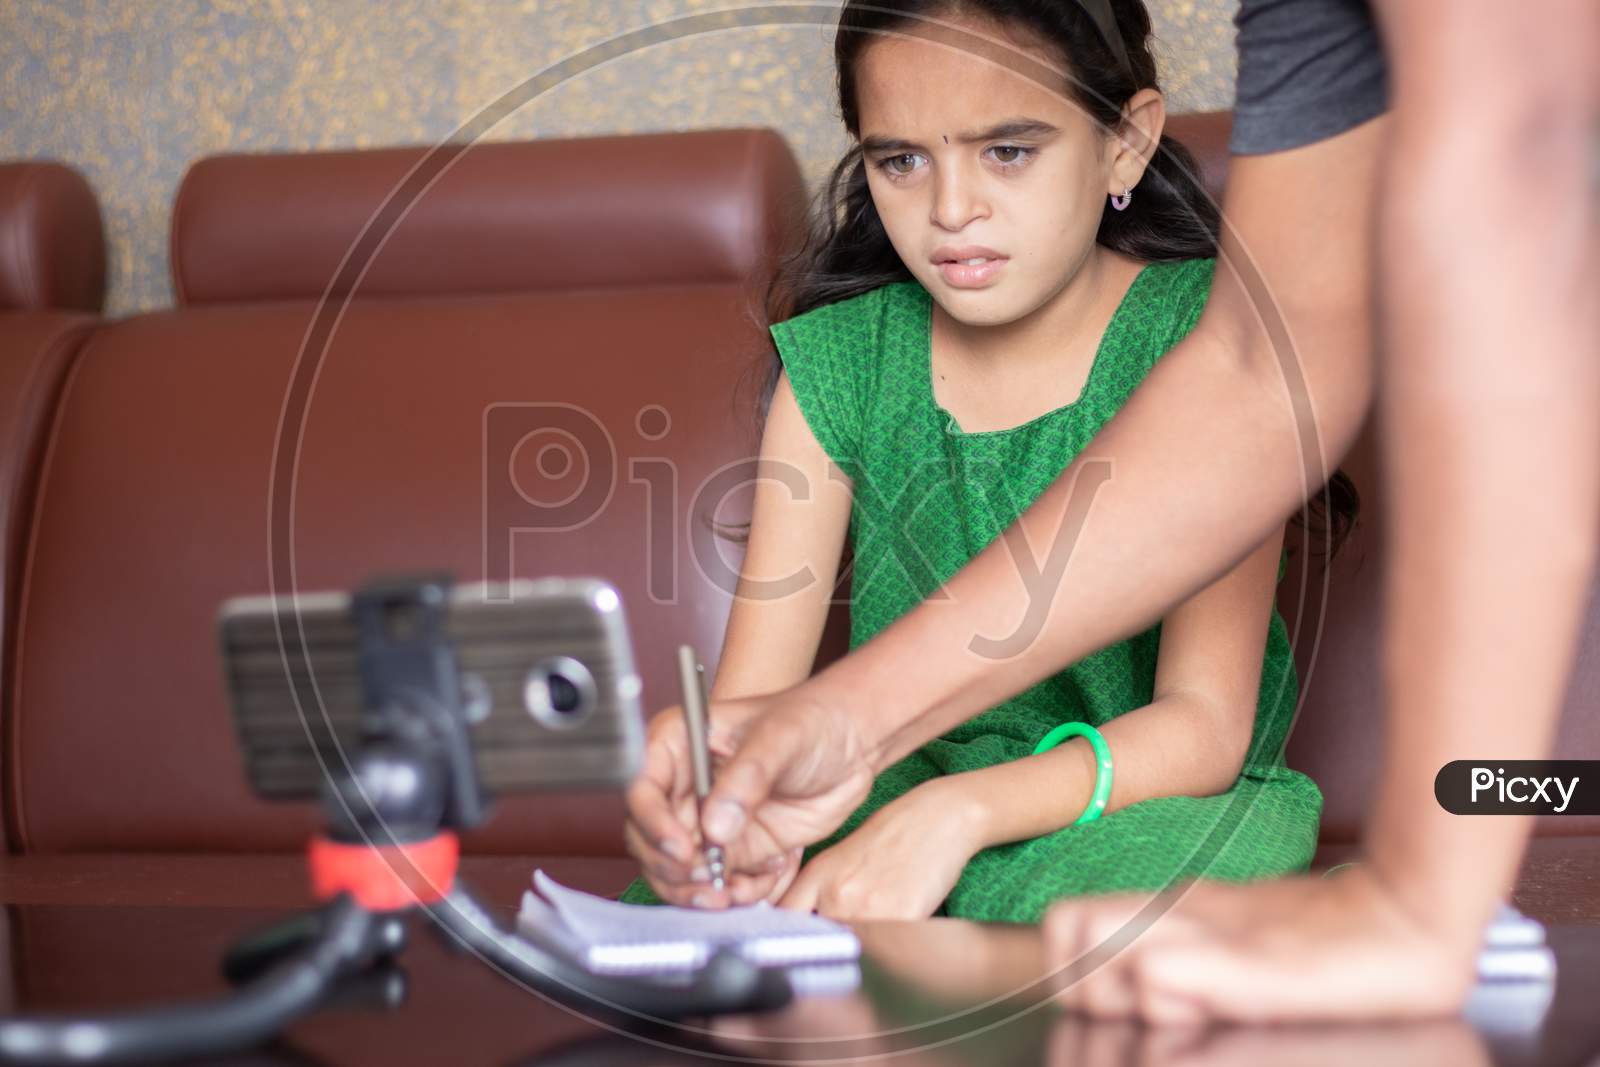 Father Helping Daughter By Solving Problem While Studying The Lesson From Online Class Or E-Learning - Concept Of Role Of Parents In Supporting Child During Homeschooling, Distance Learning.